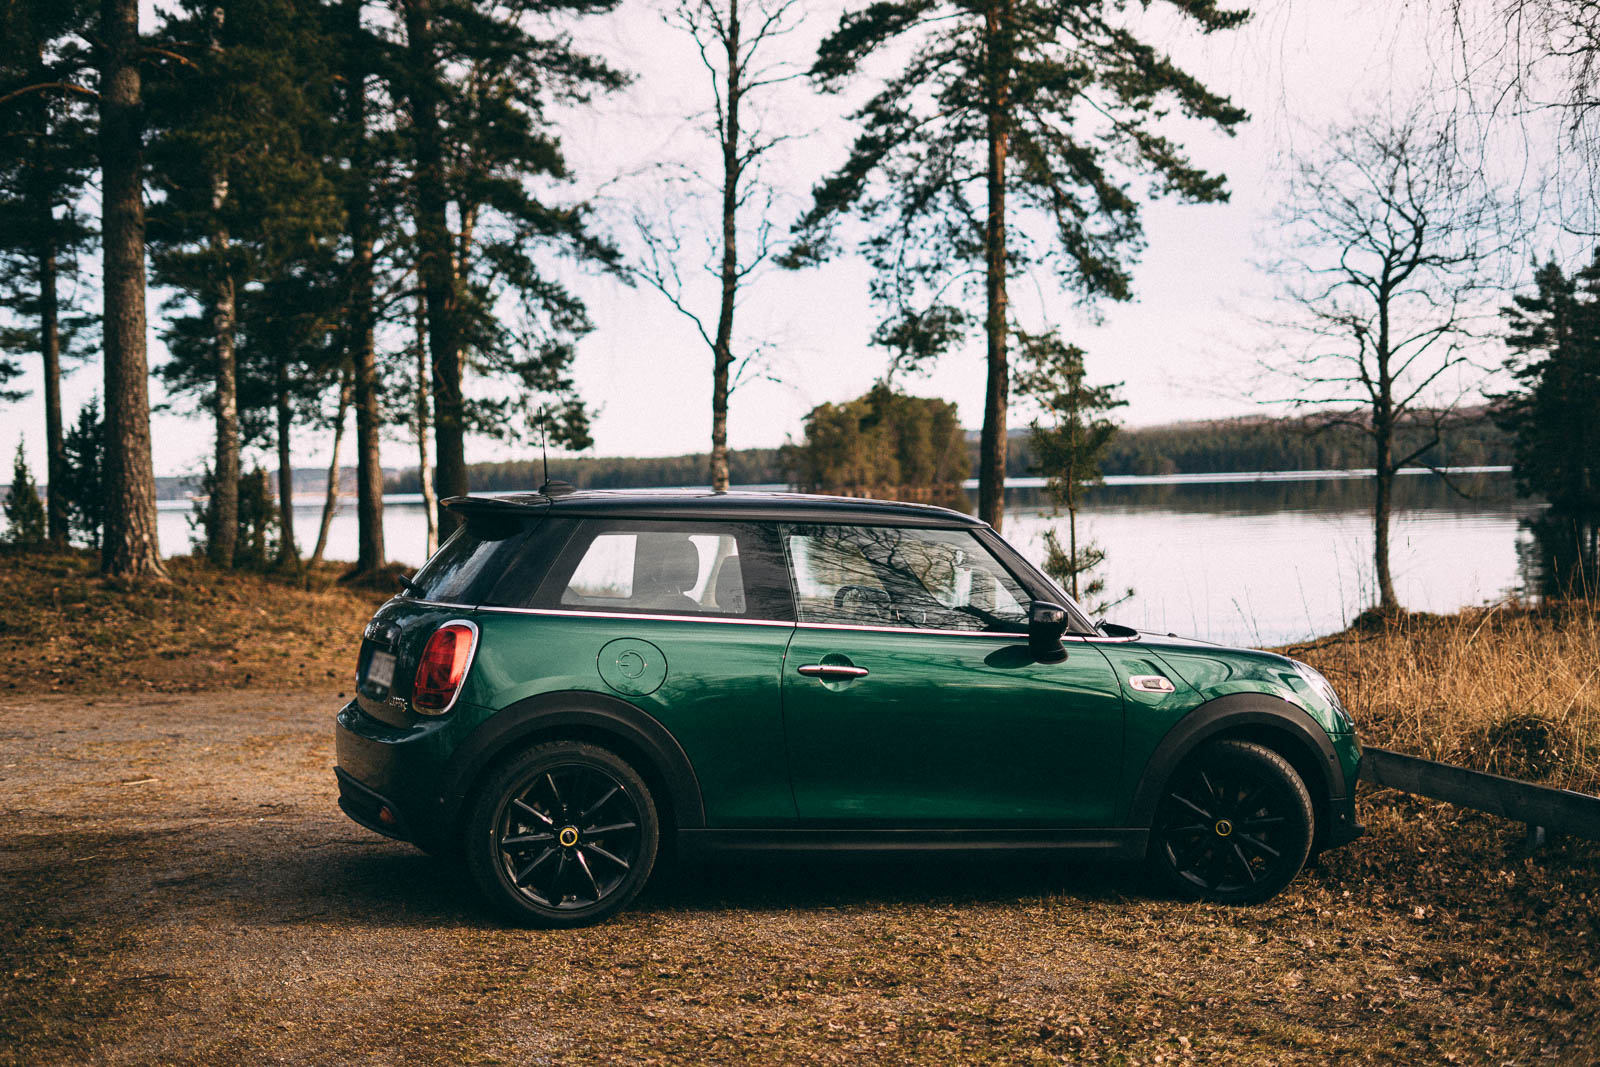 The profile of a green, three-door car. It stands parked outdoors; there's a lake in the background, and it looks like autumn.